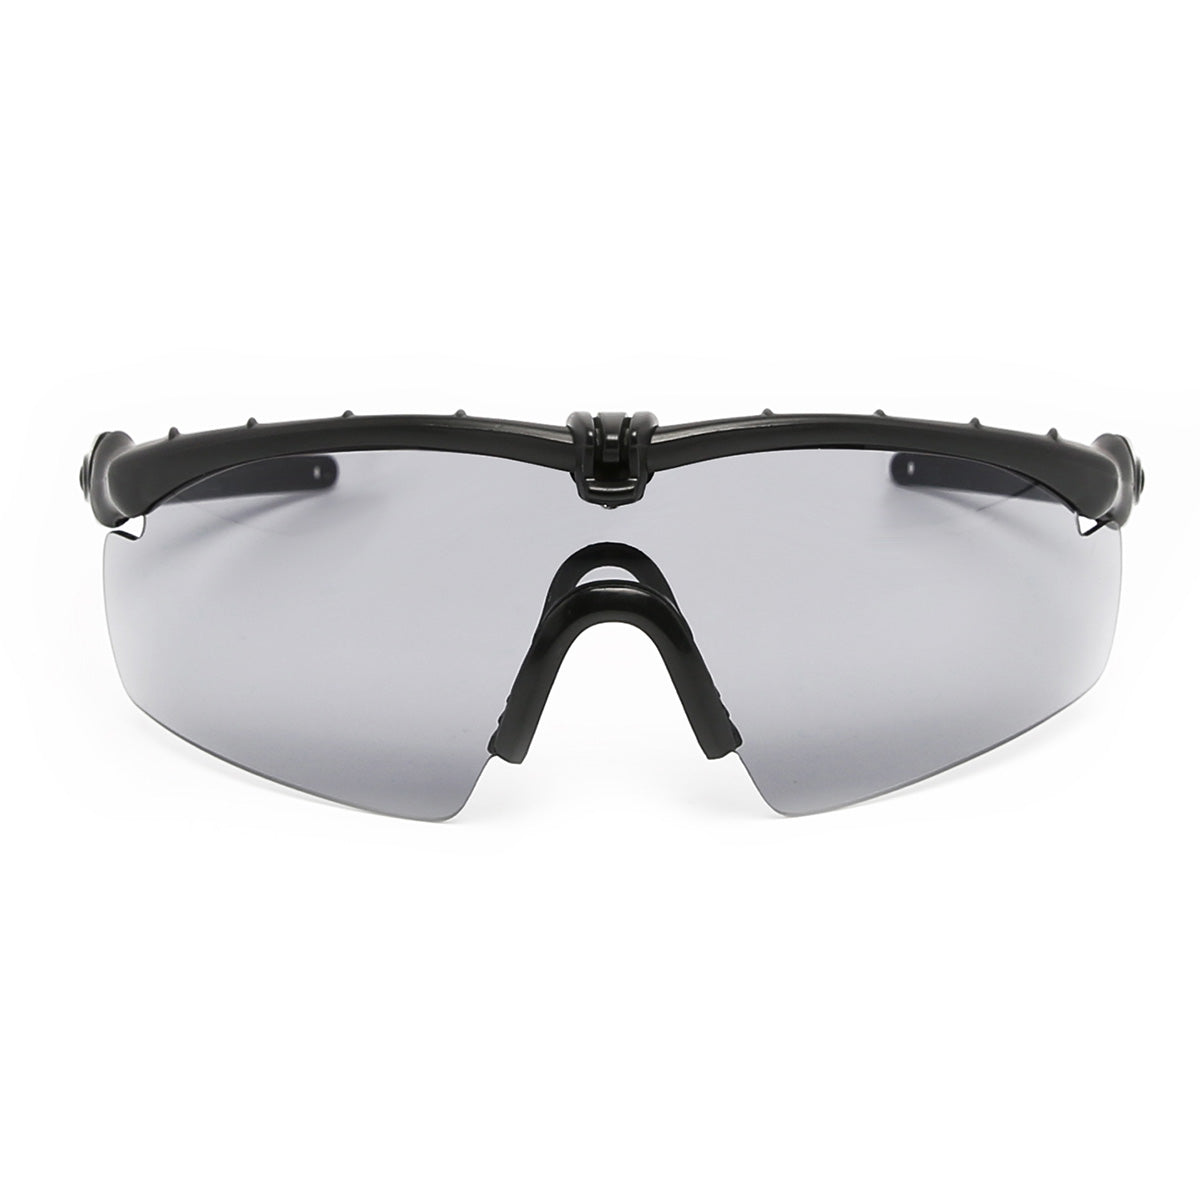 Unisex Sporty with headband & 3 interchangeable Color Lense Cycling Sunglasses